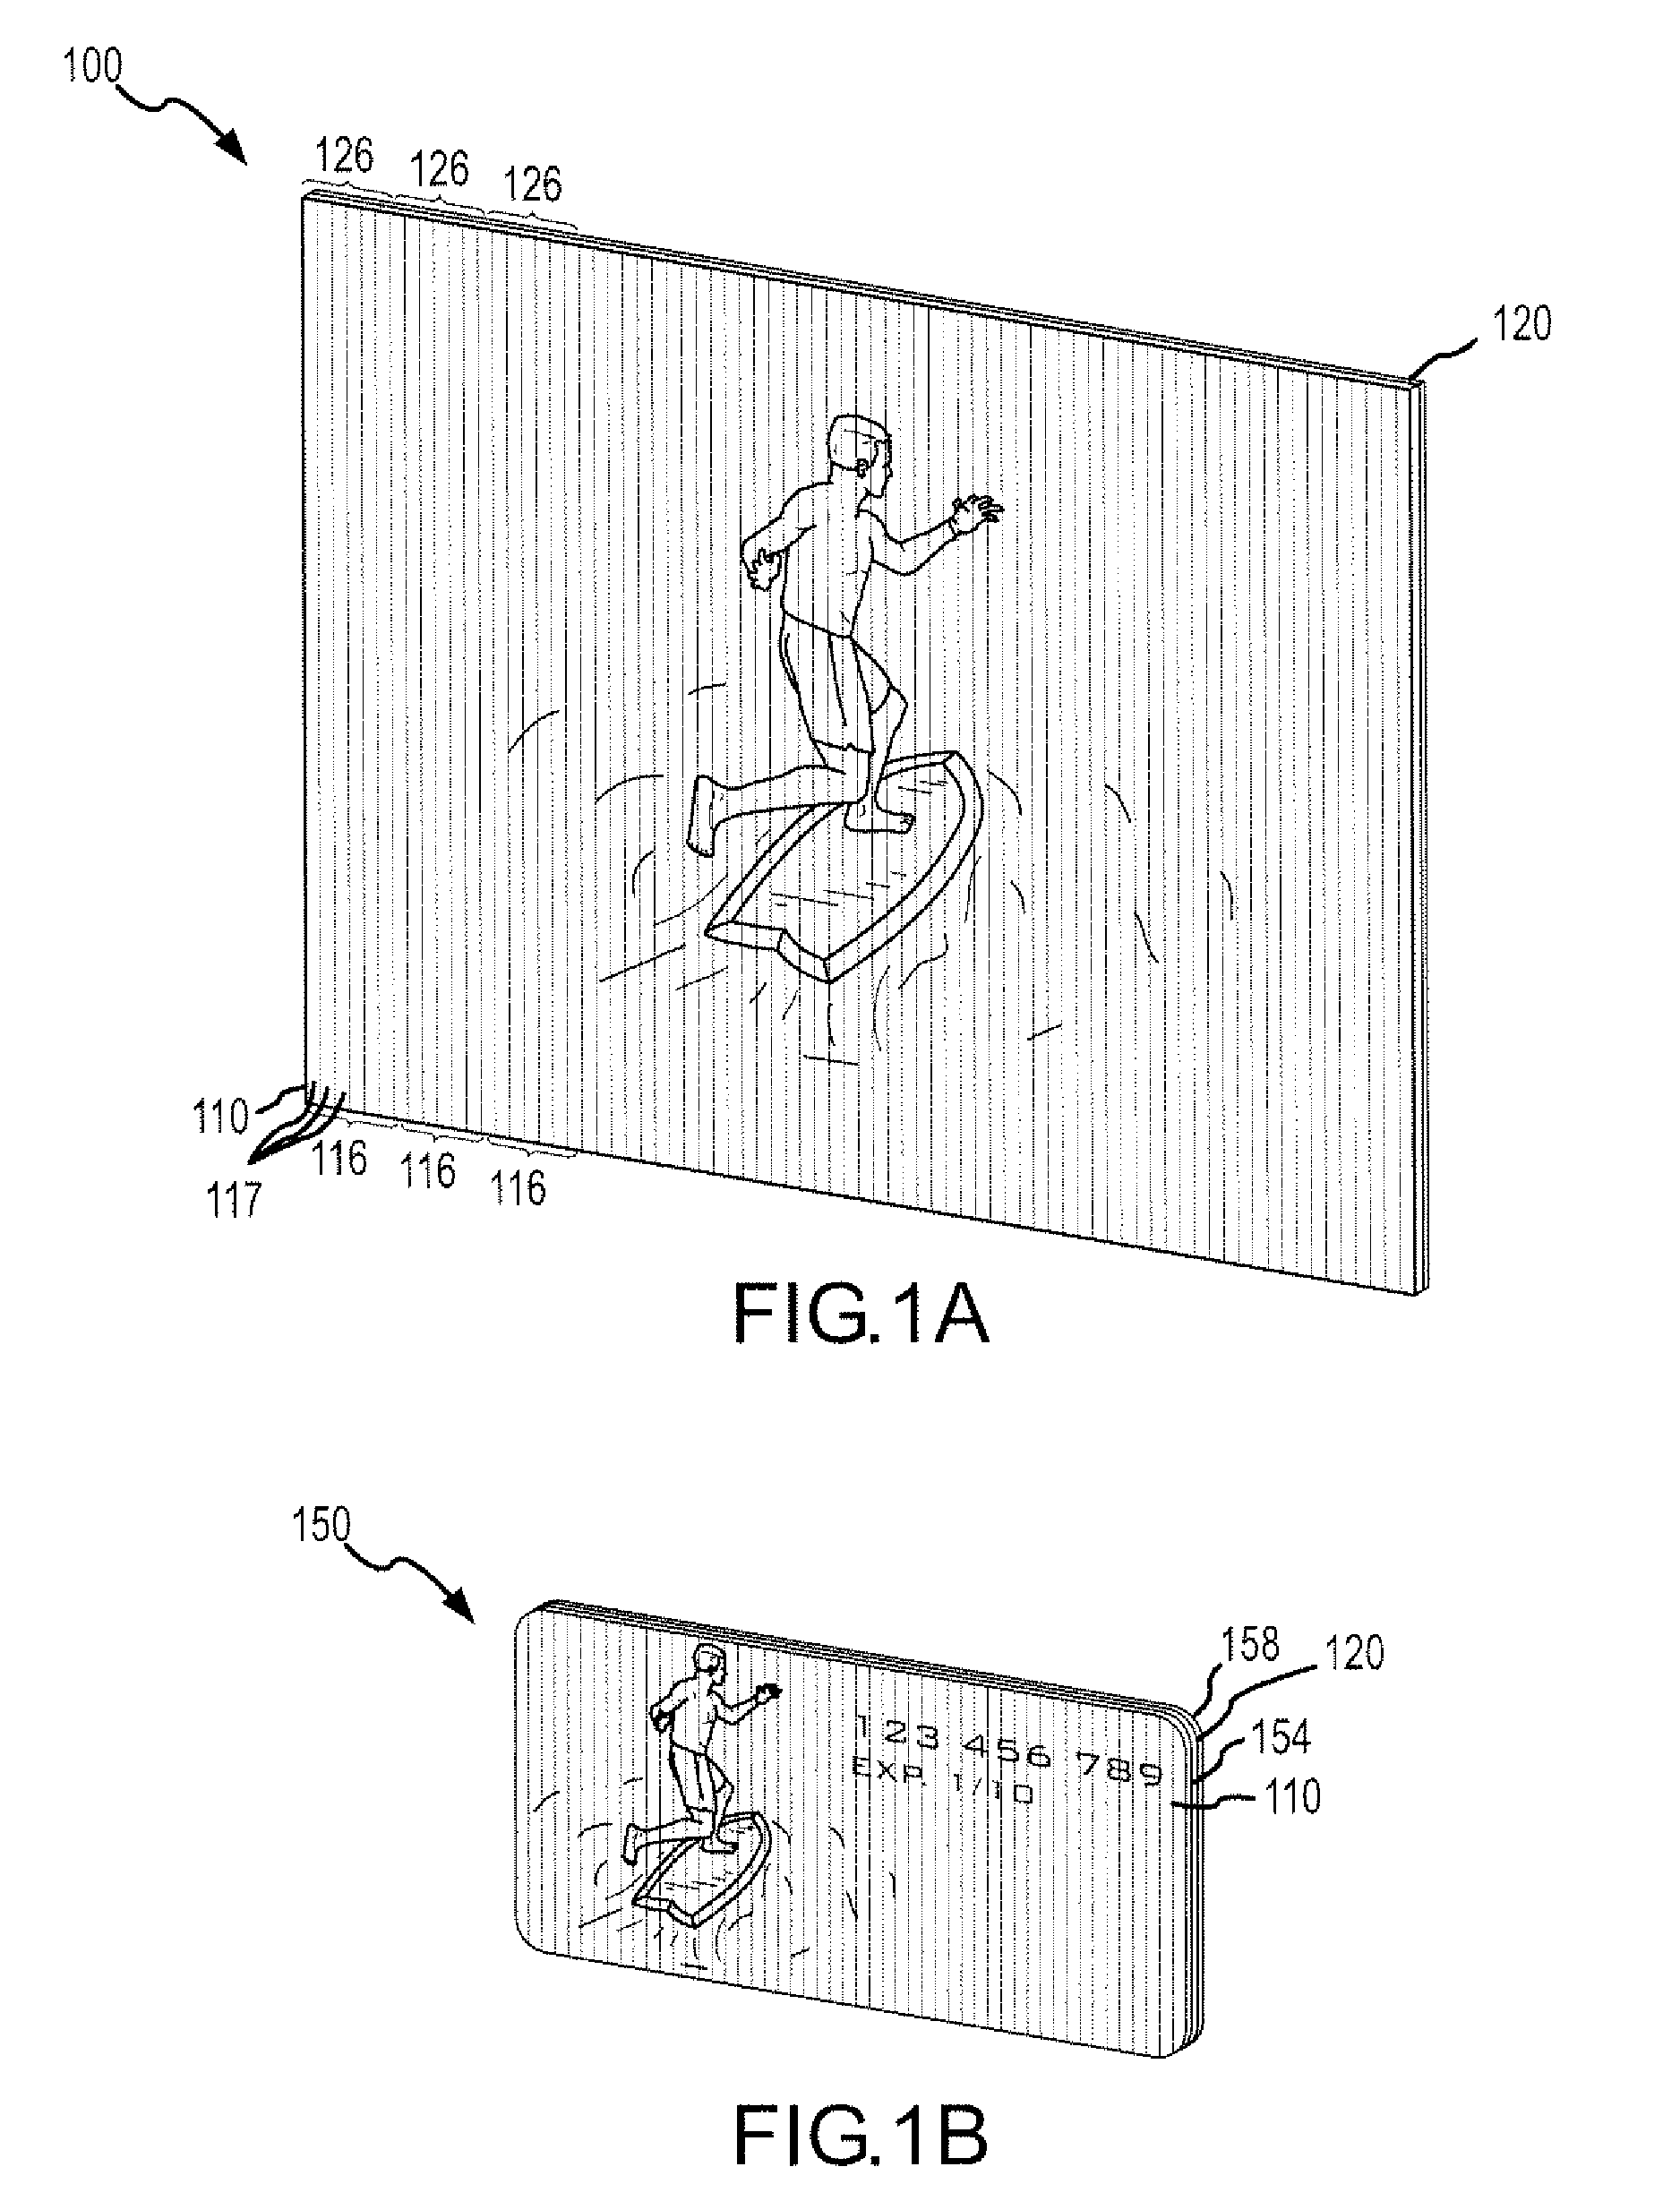 Manufacture of display devices with ultrathin lens arrays for viewing interlaced images